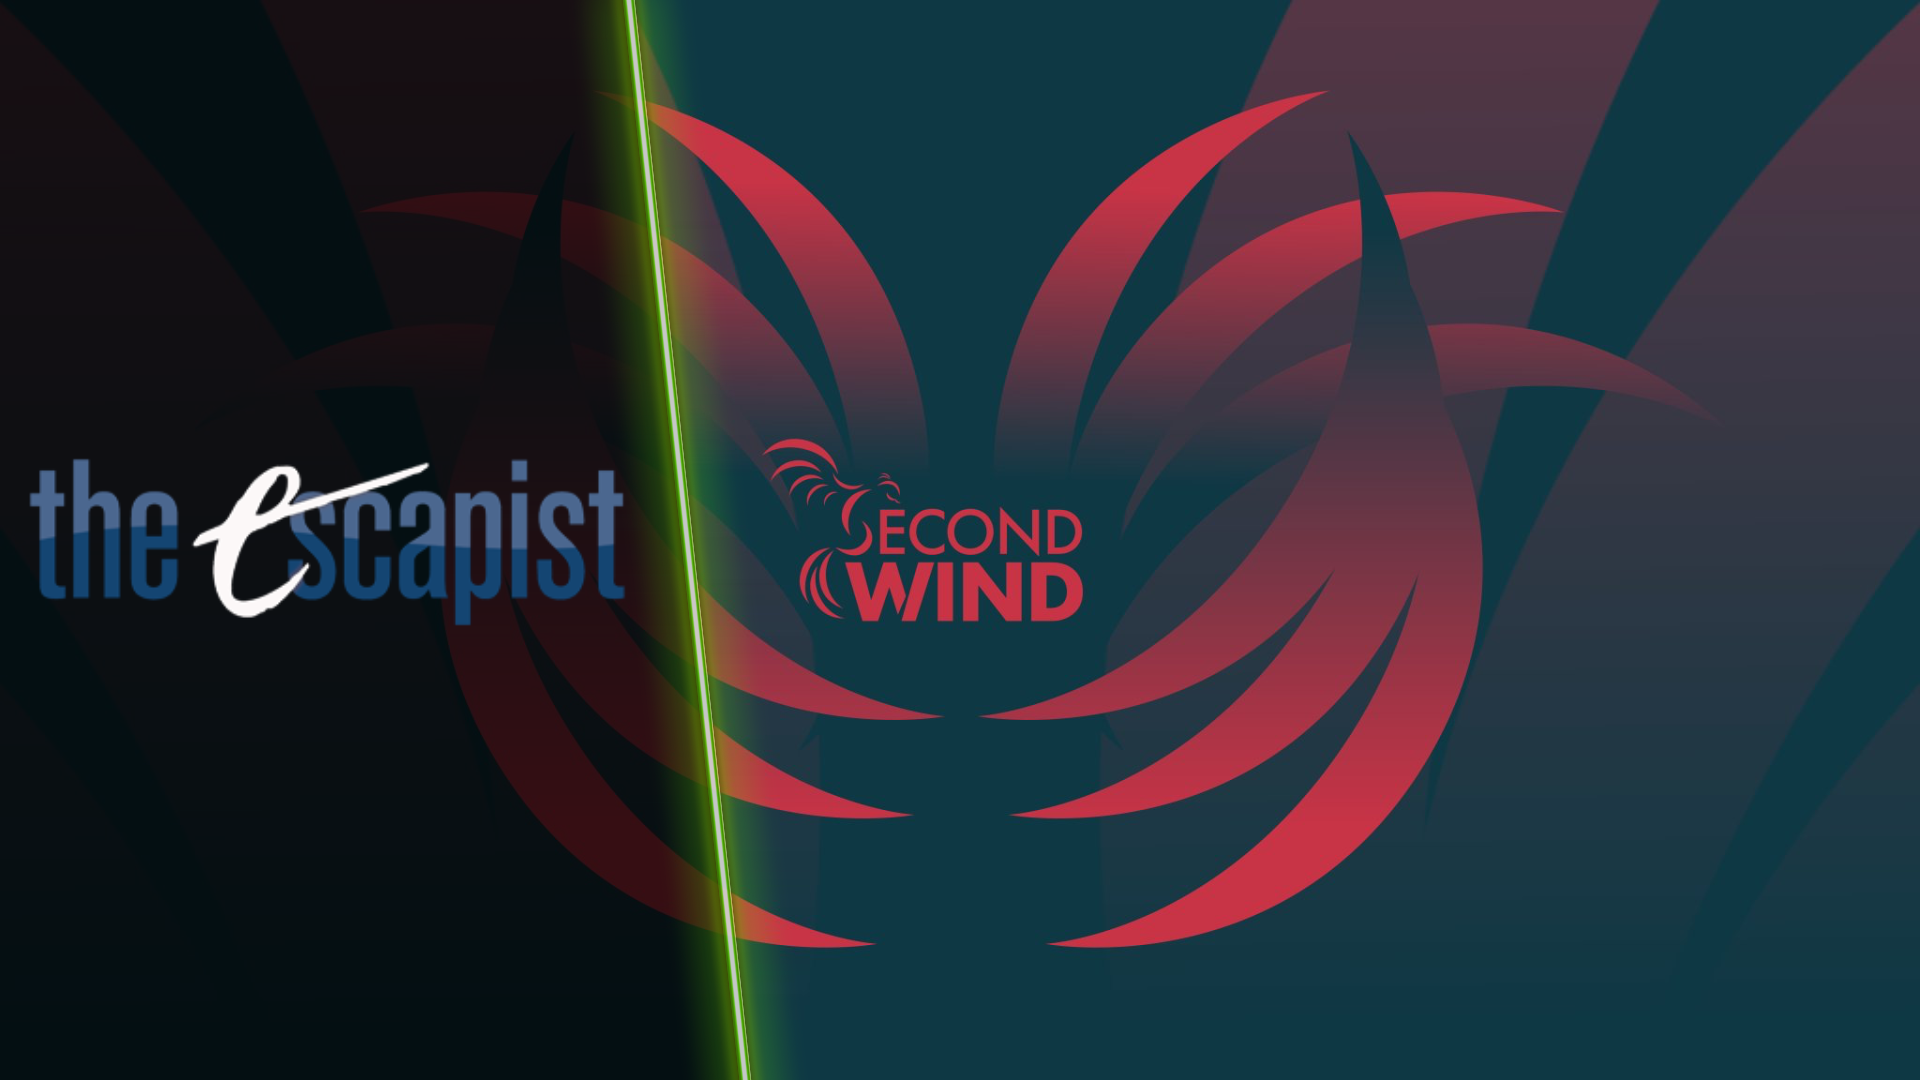 Former Staff of The Escapist Form New Gaming Outlet Called Second Wind